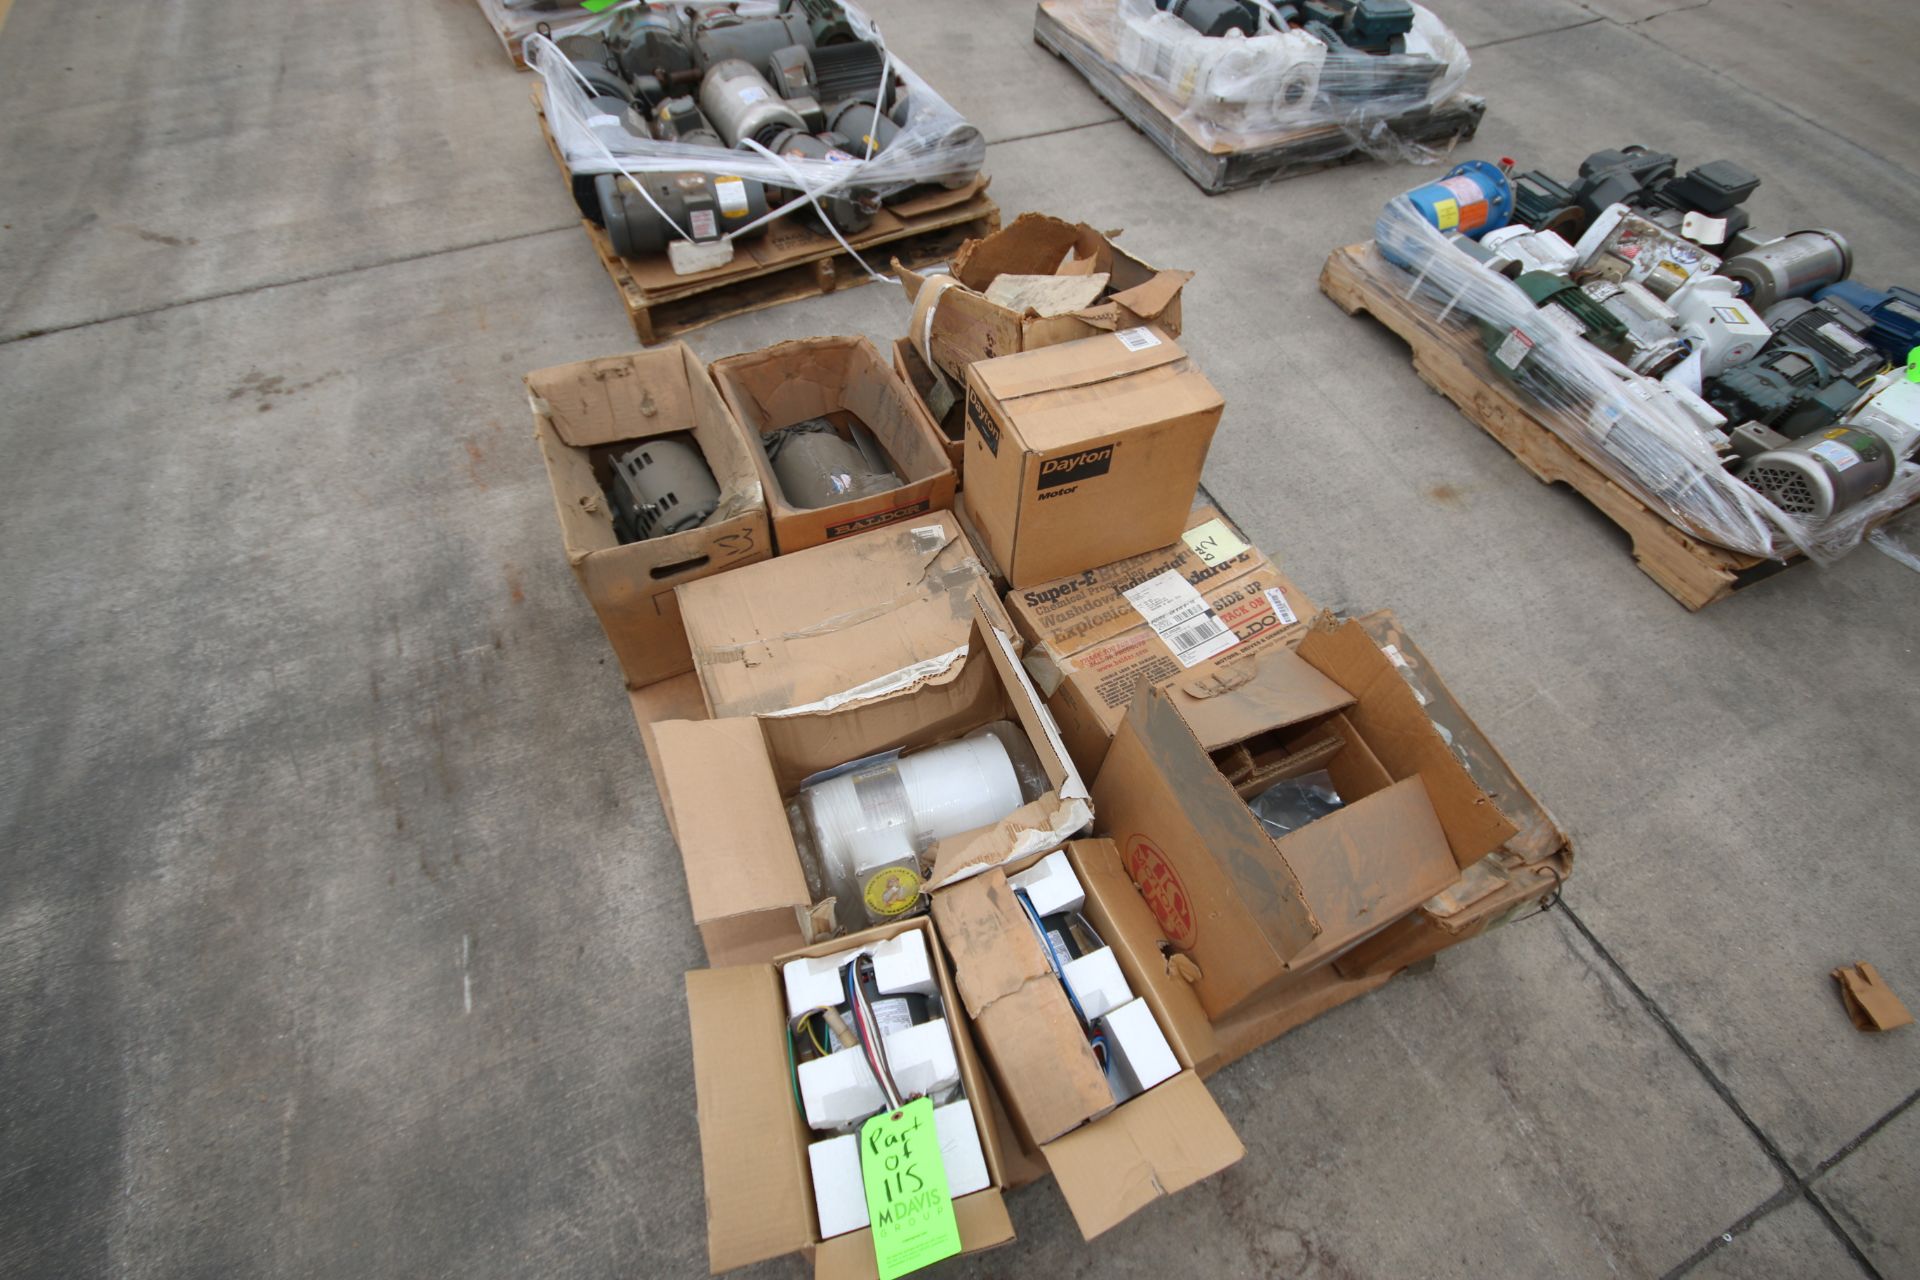 3-Pallets of NEW Motors and Drives, Aprox. (32) NEW In Box Drives/Motors, hp Range from 1/2 hp- 10